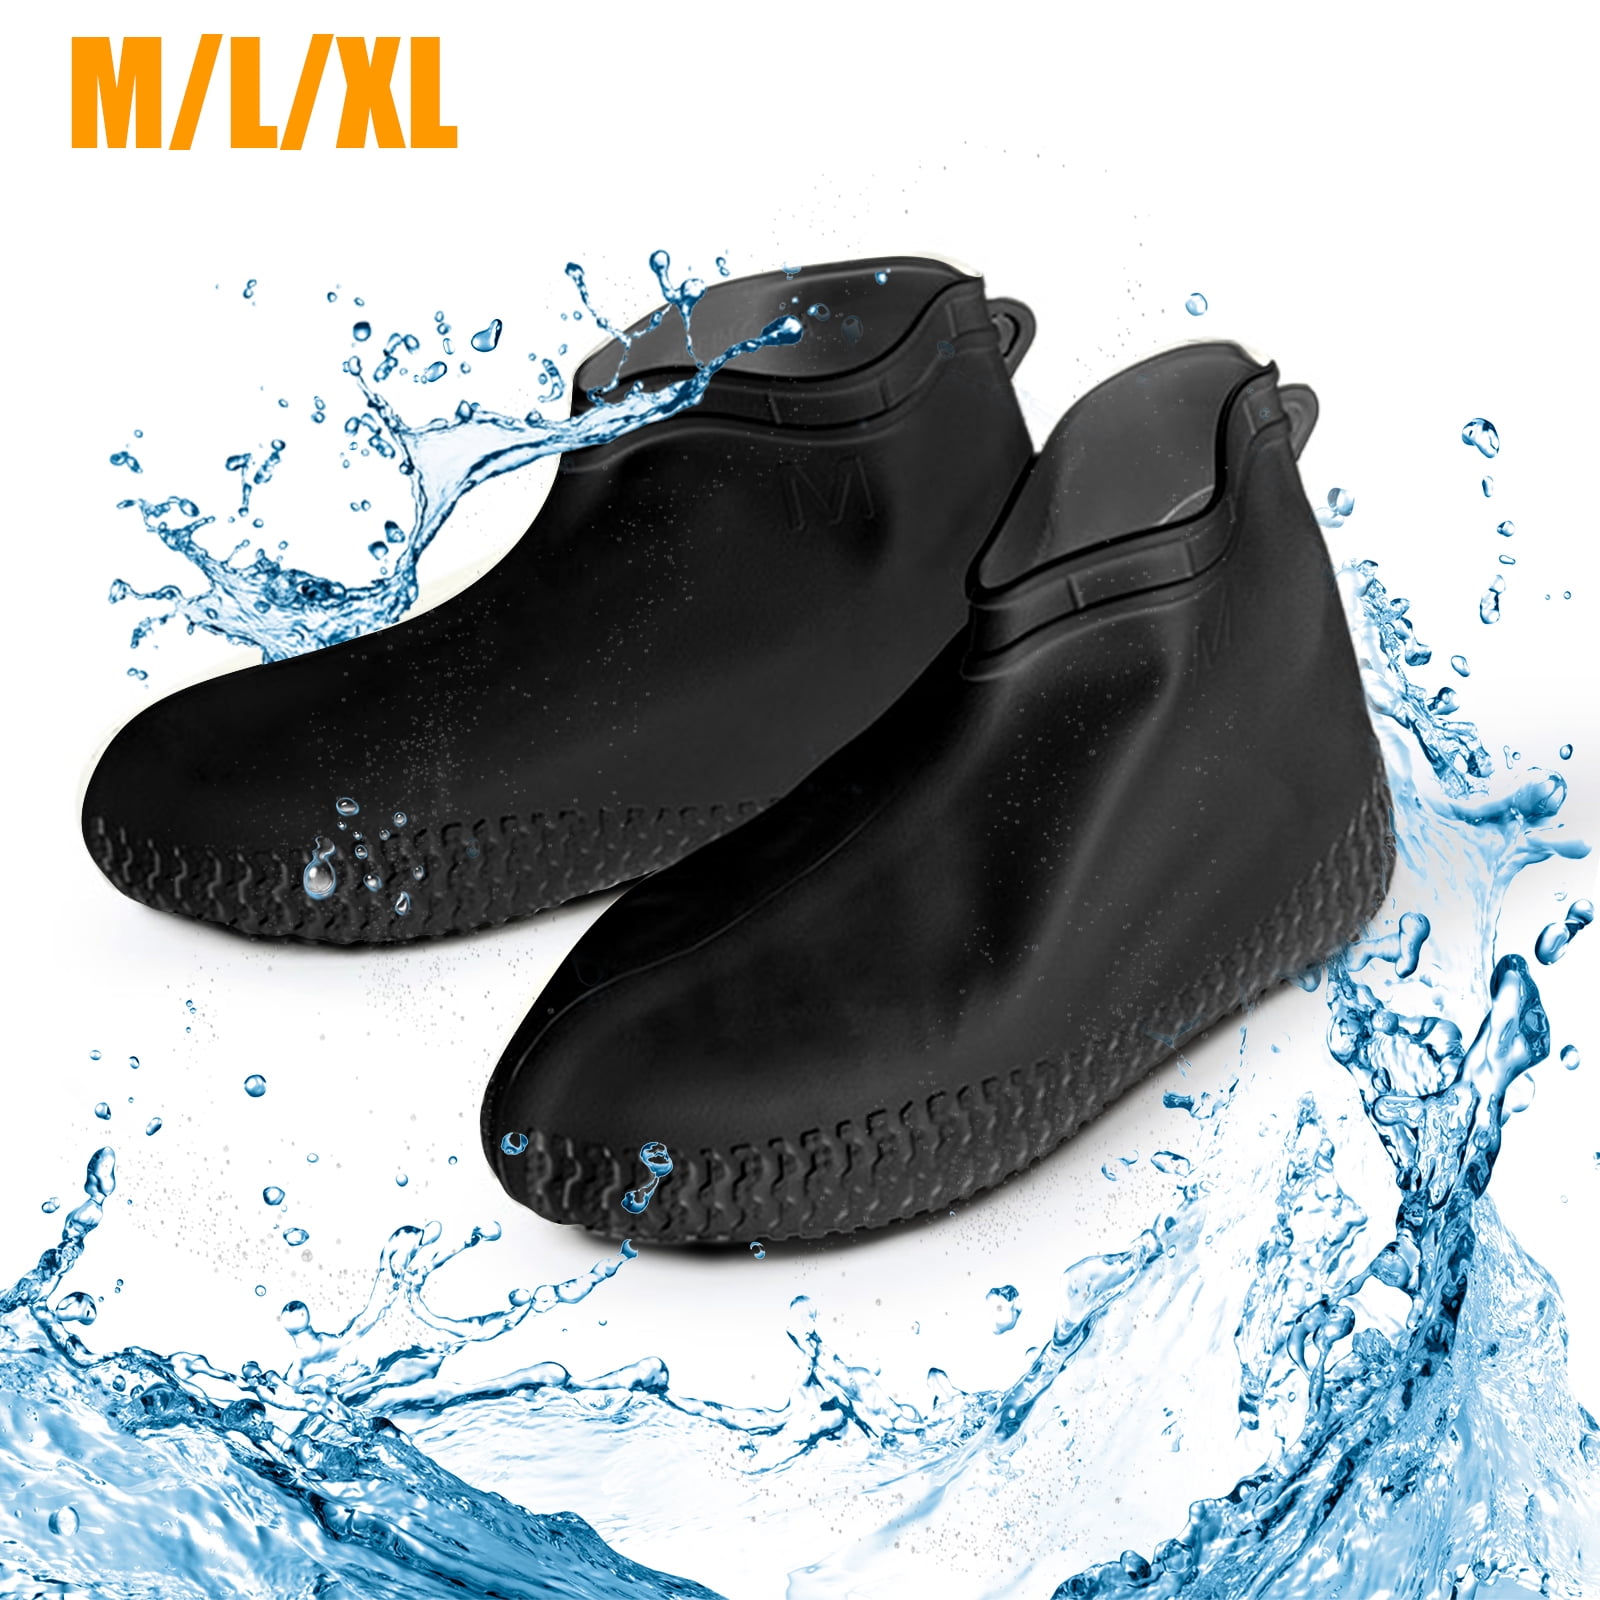 Rain Shoe Covers Waterproof and Slip Resistance Galoshes Rain Boots X-Large 